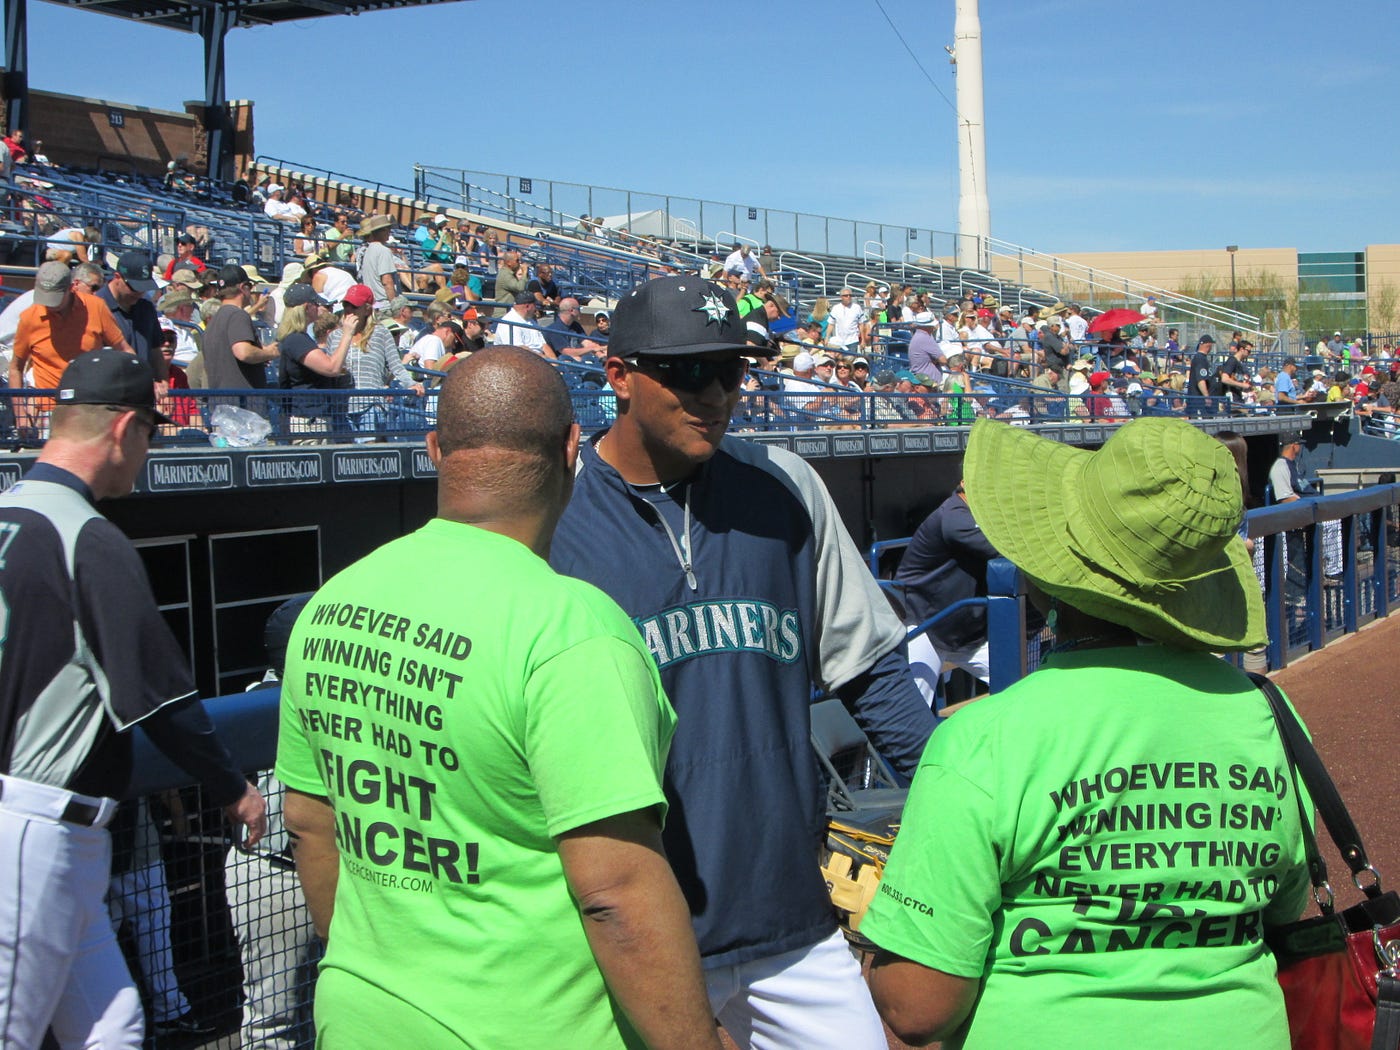 Mariners Spring Training Update — Day 18, by Mariners PR